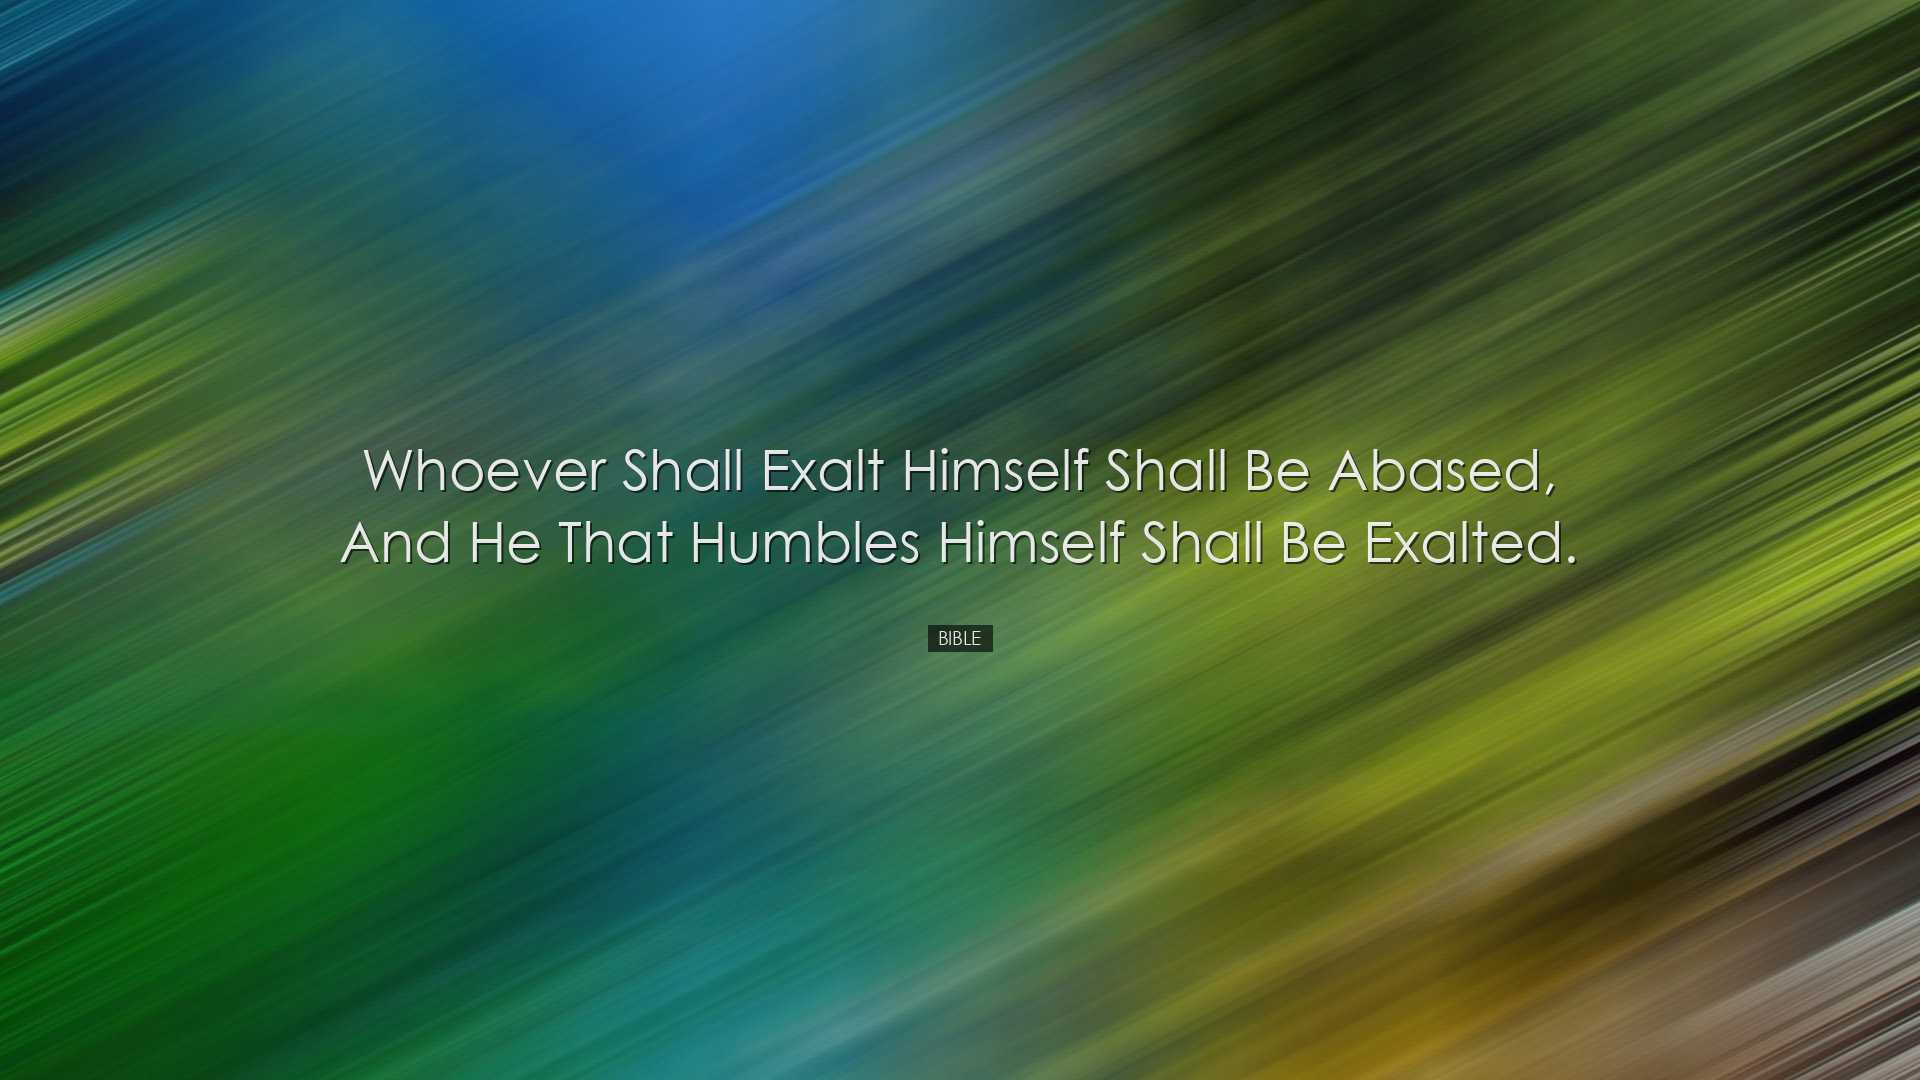 Whoever shall exalt himself shall be abased, and he that humbles h